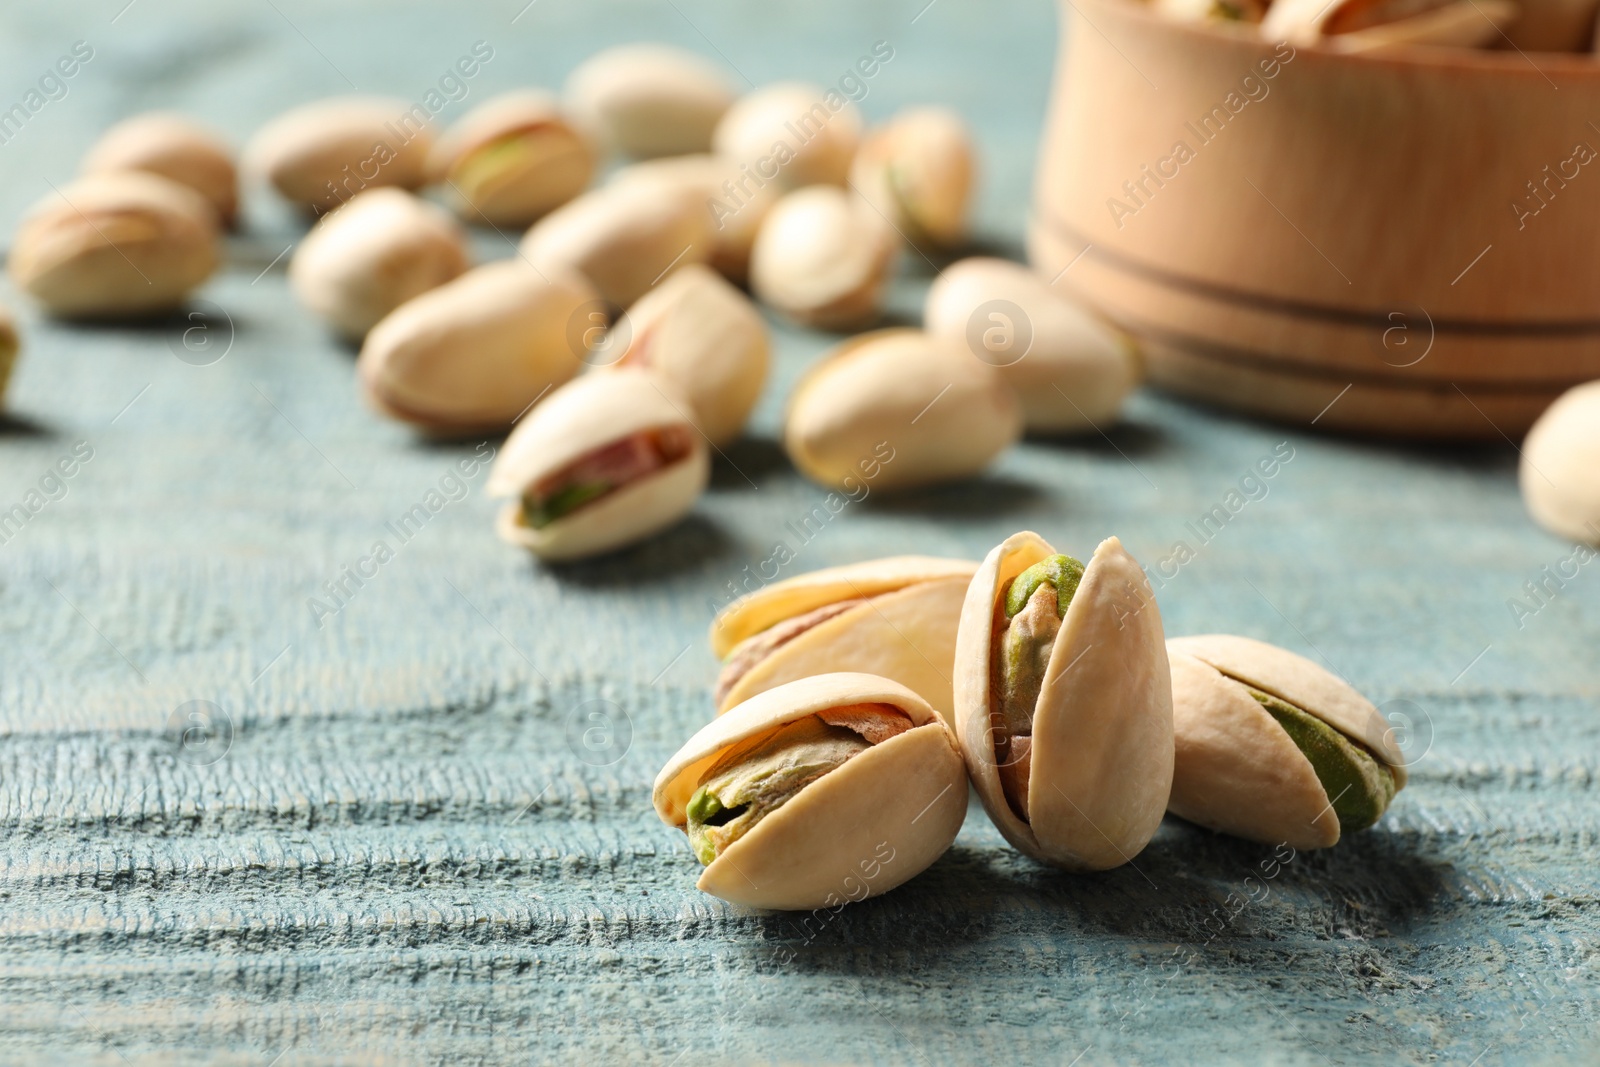 Photo of Organic pistachio nuts on wooden table, closeup